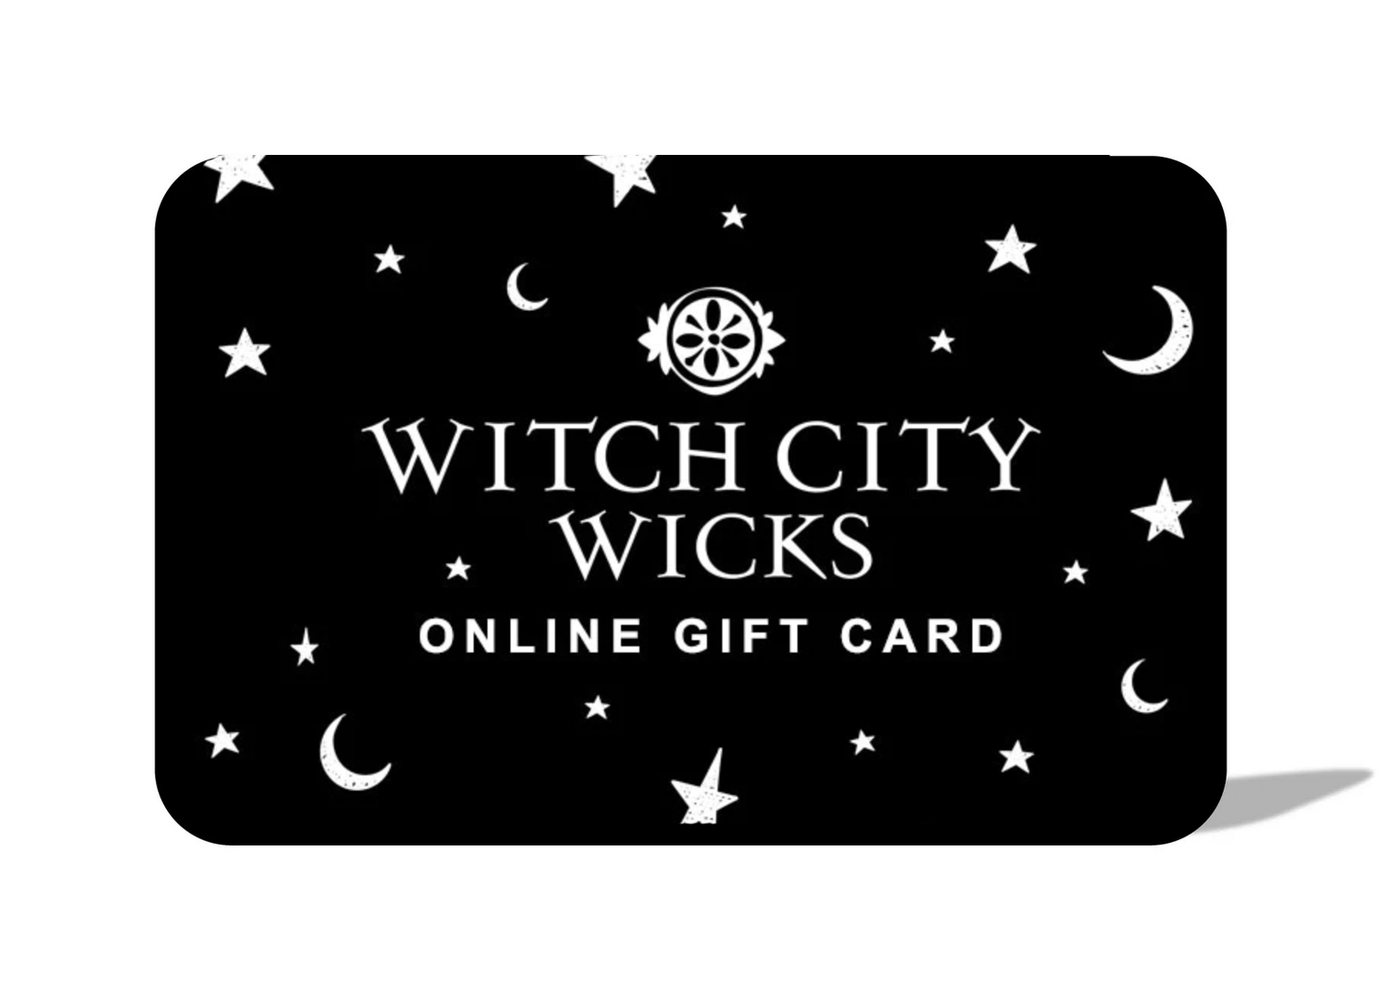 Witch City Wicks online e-gift card